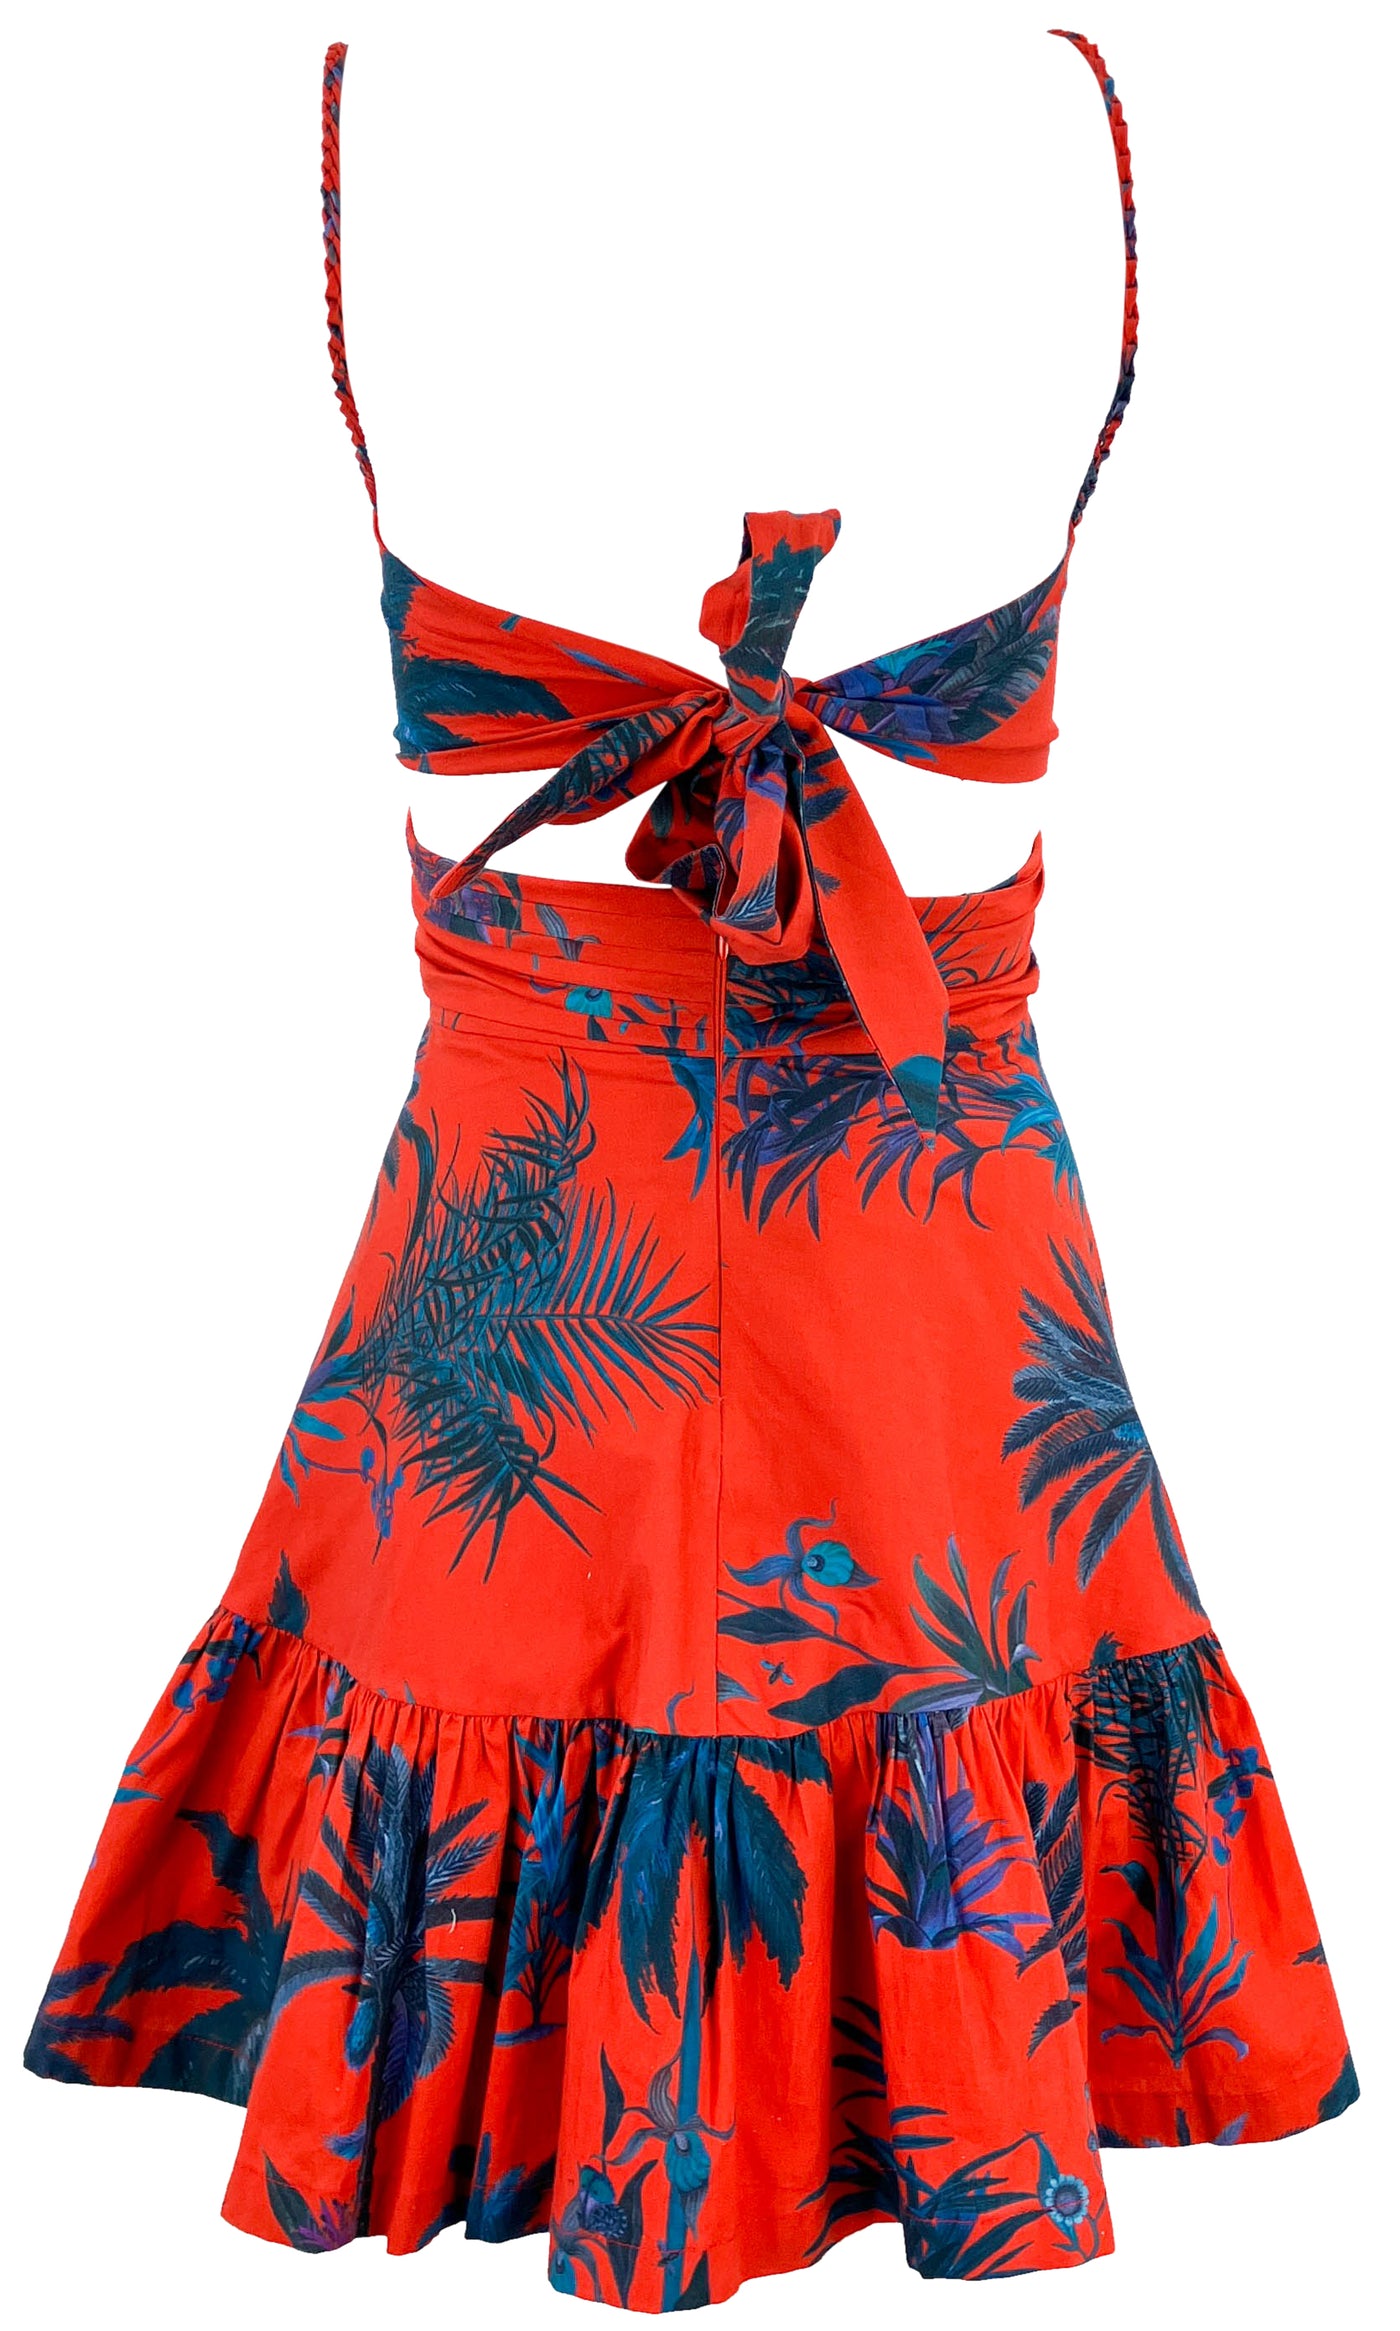 Andres Otalora Flare Dress in Orange Print - Discounts on Andres Otálora at UAL